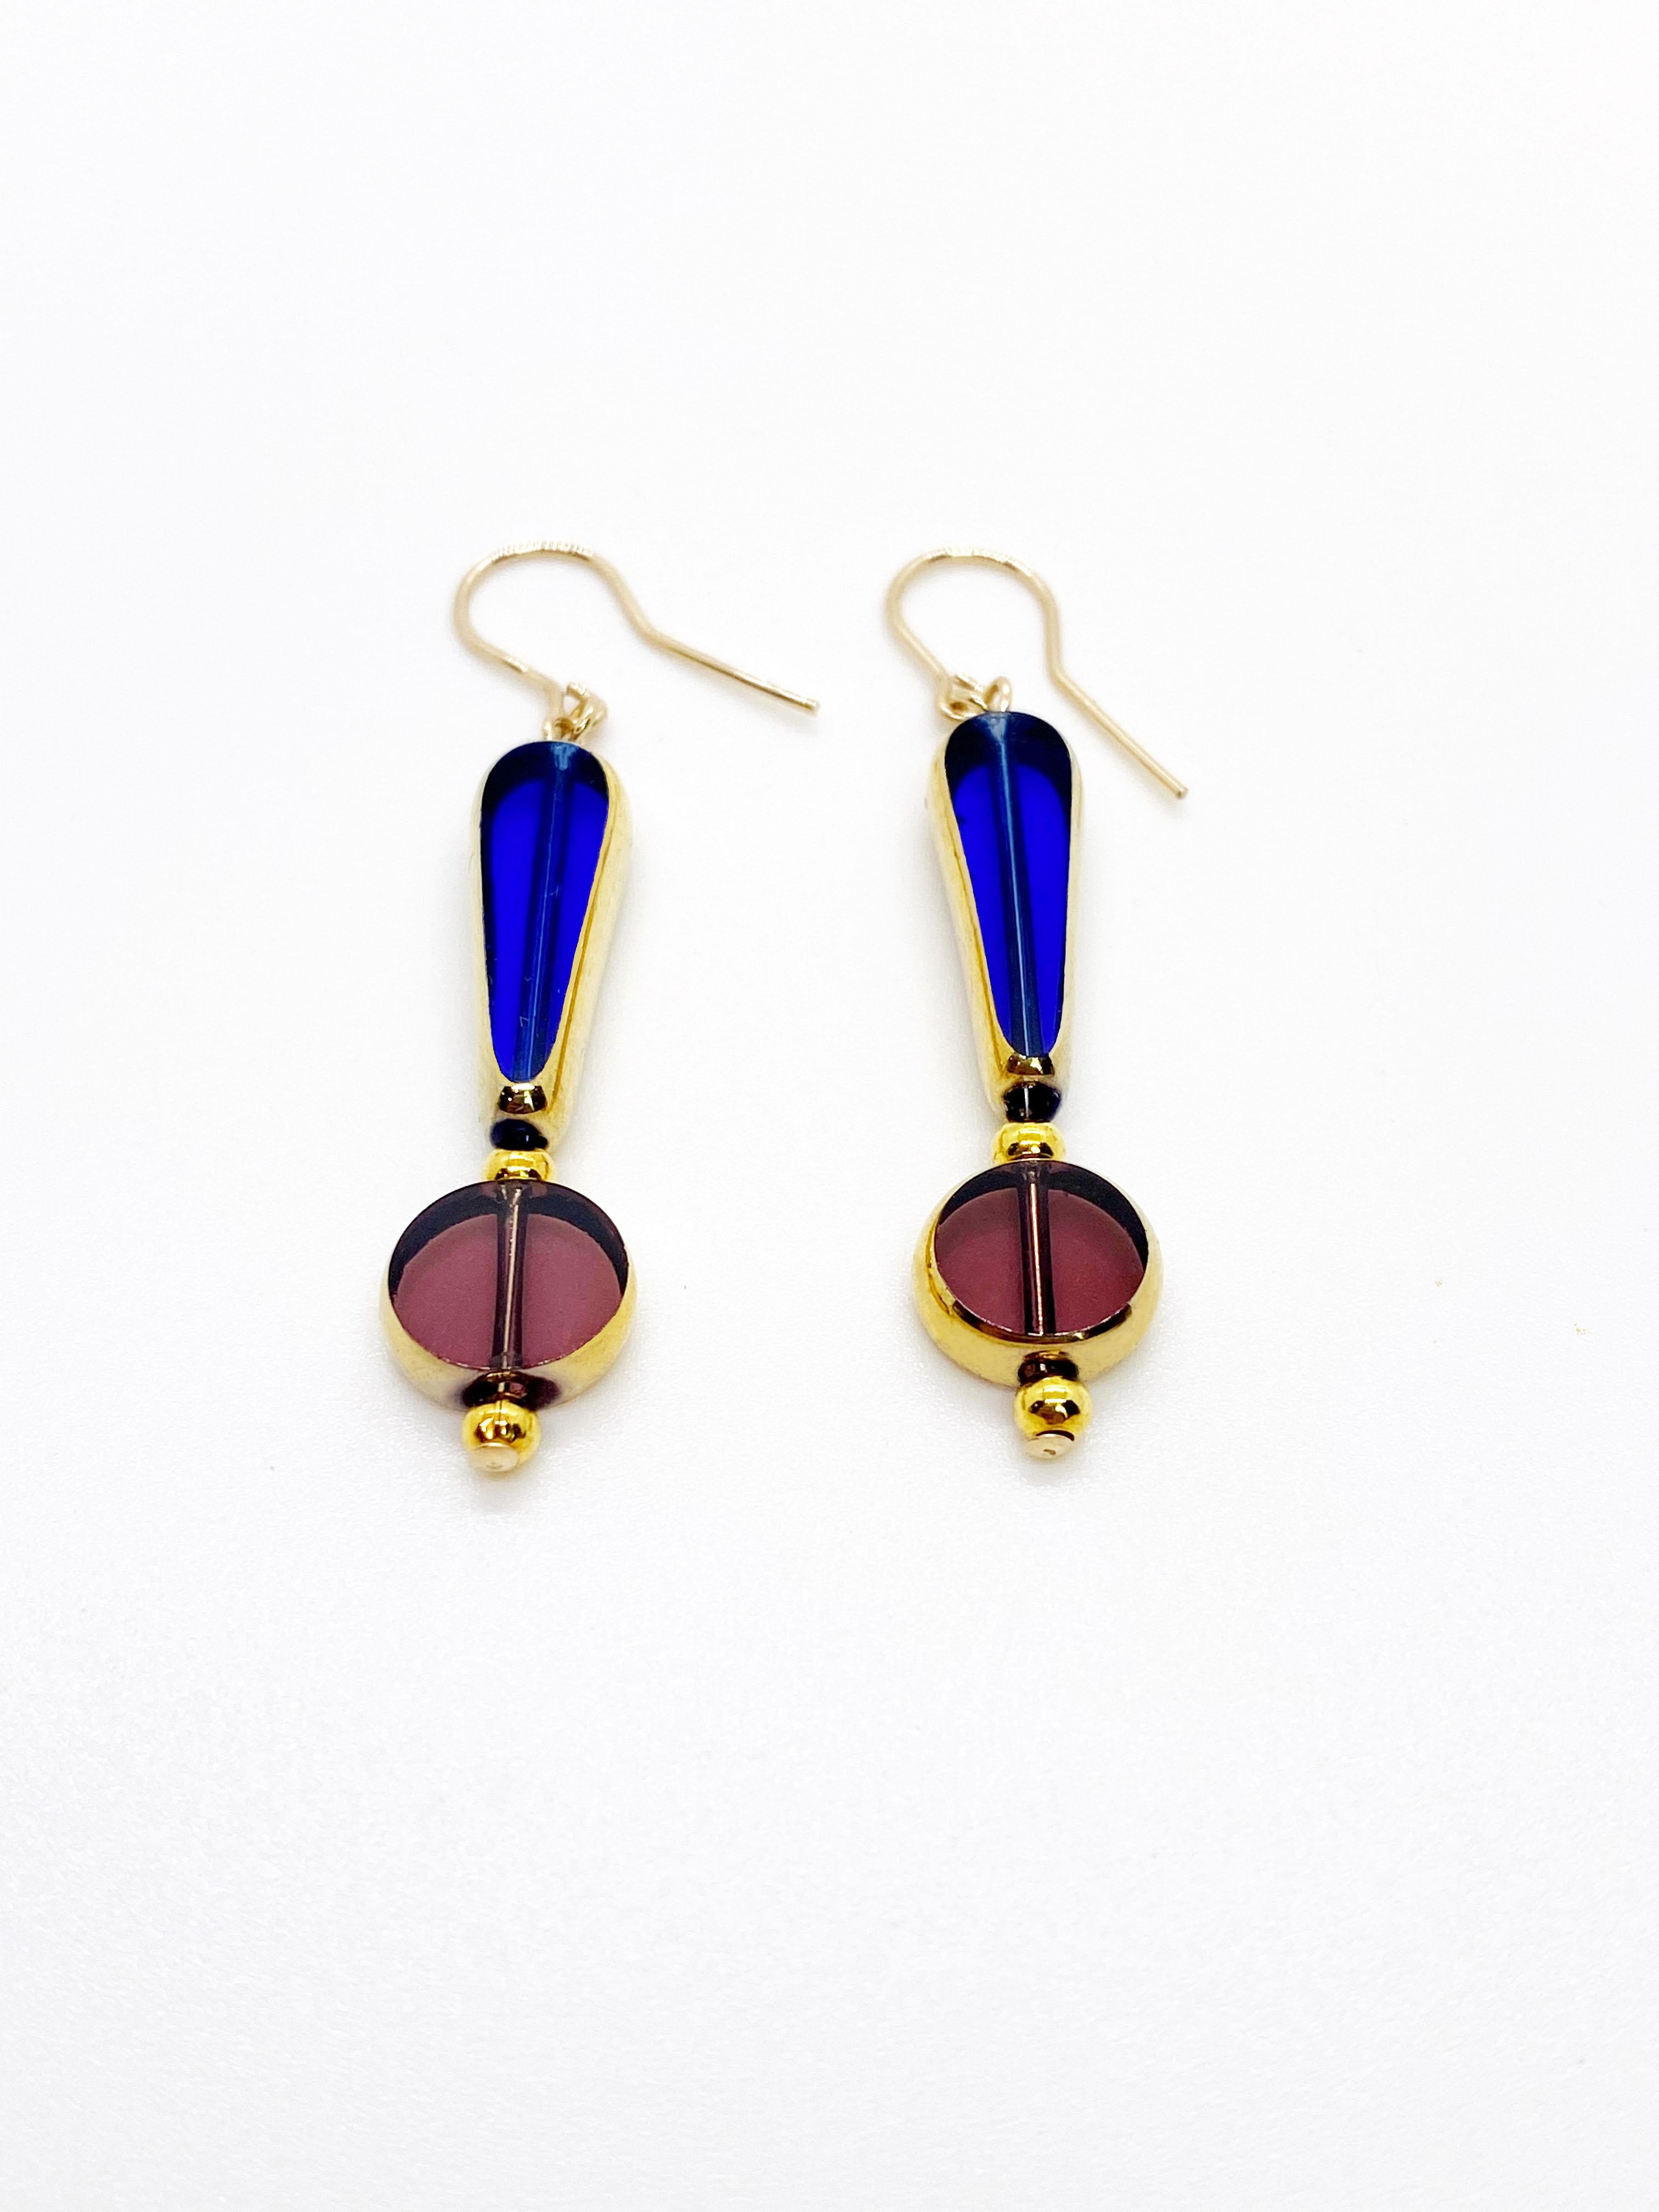 Each earring consist of 2 translucent German vintage glass beads that are framed with 24K gold with gold plated round beads. The earrings are finished with 14K gold-filled ear wires.

The vintage German glass beads were hand pressed during the